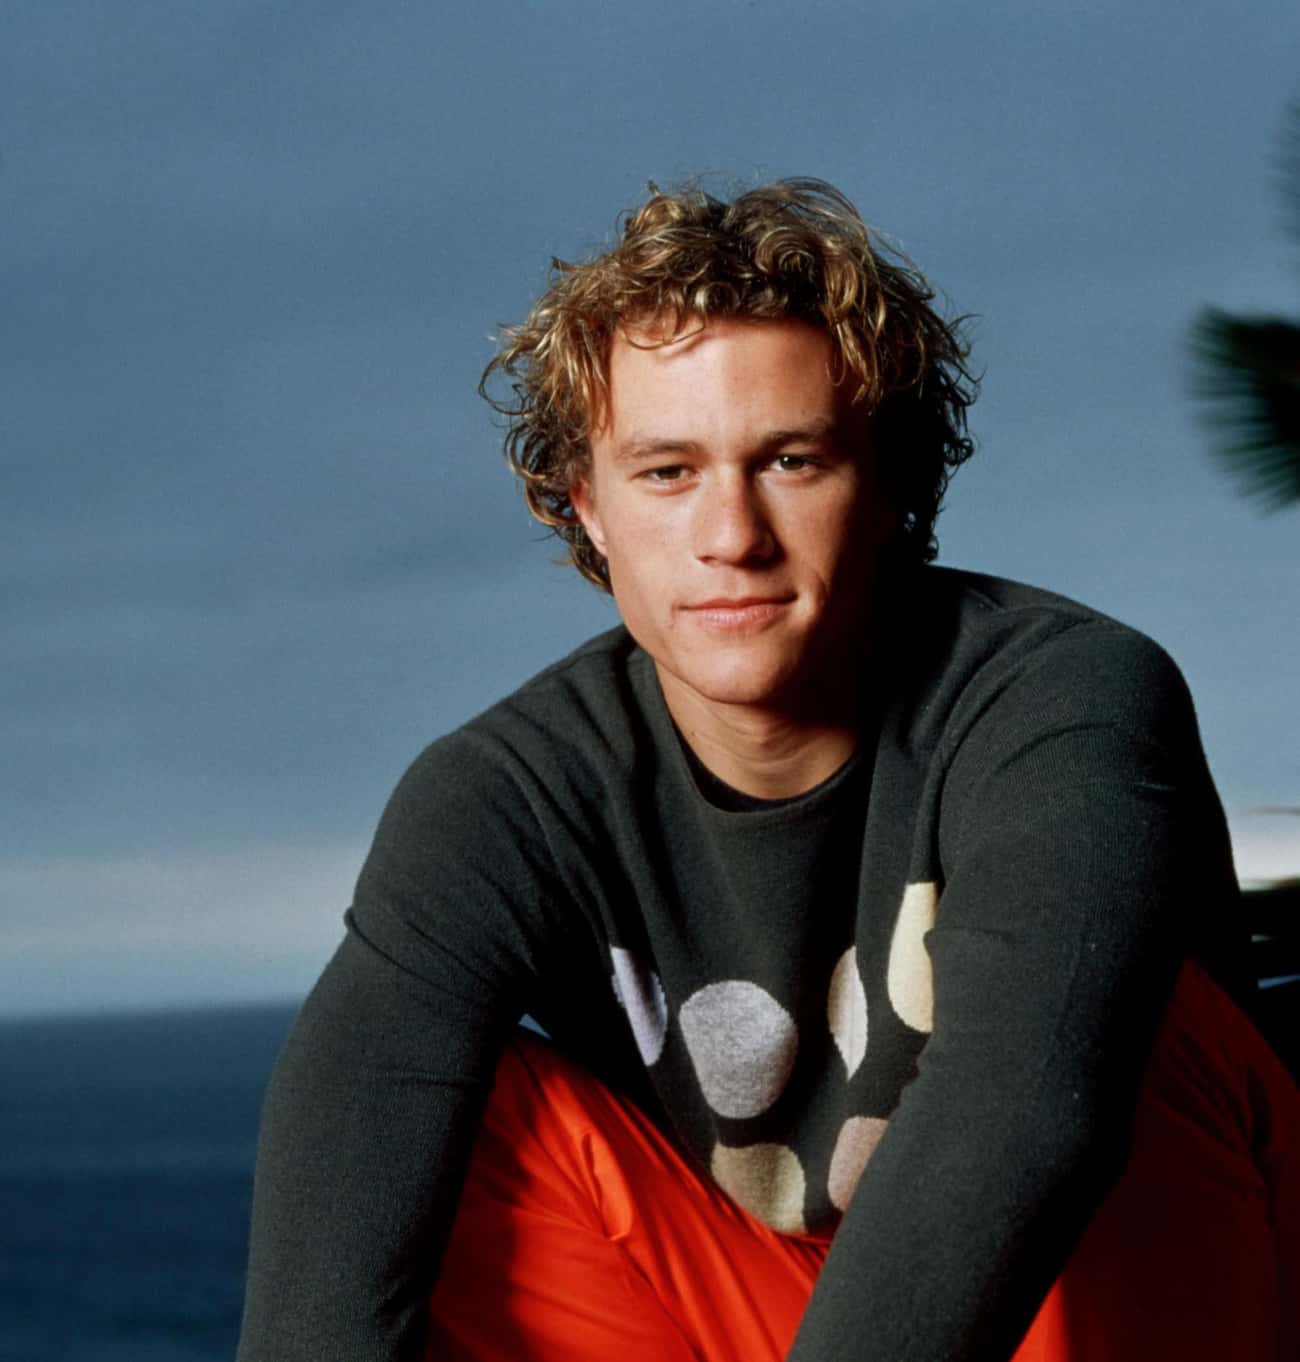 Young Heath Ledger in Gray Sweater with White Polka Dots